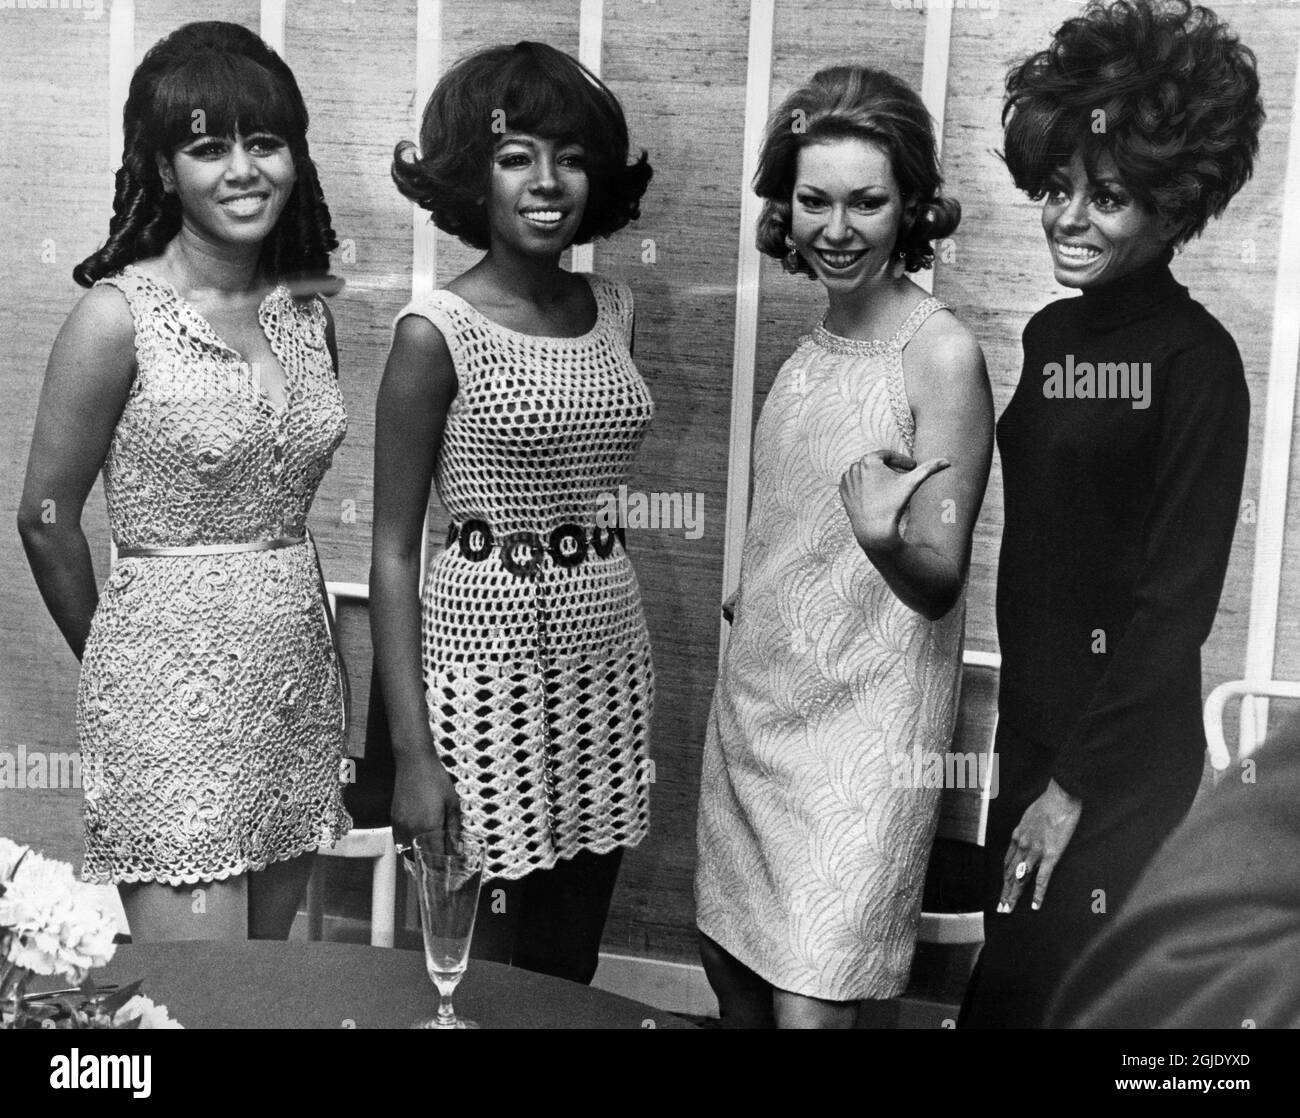 STOCKHOLM 19680209 Princess Christina of Sweden meets the Supremes backstage after their performance at Berns. Fromleft to right: Cindy Birdsong, Mary Wilson, Princess Christina and Diana Ross. Photo: Goran Blom / Expressen / TT / Code: 192  Stock Photo